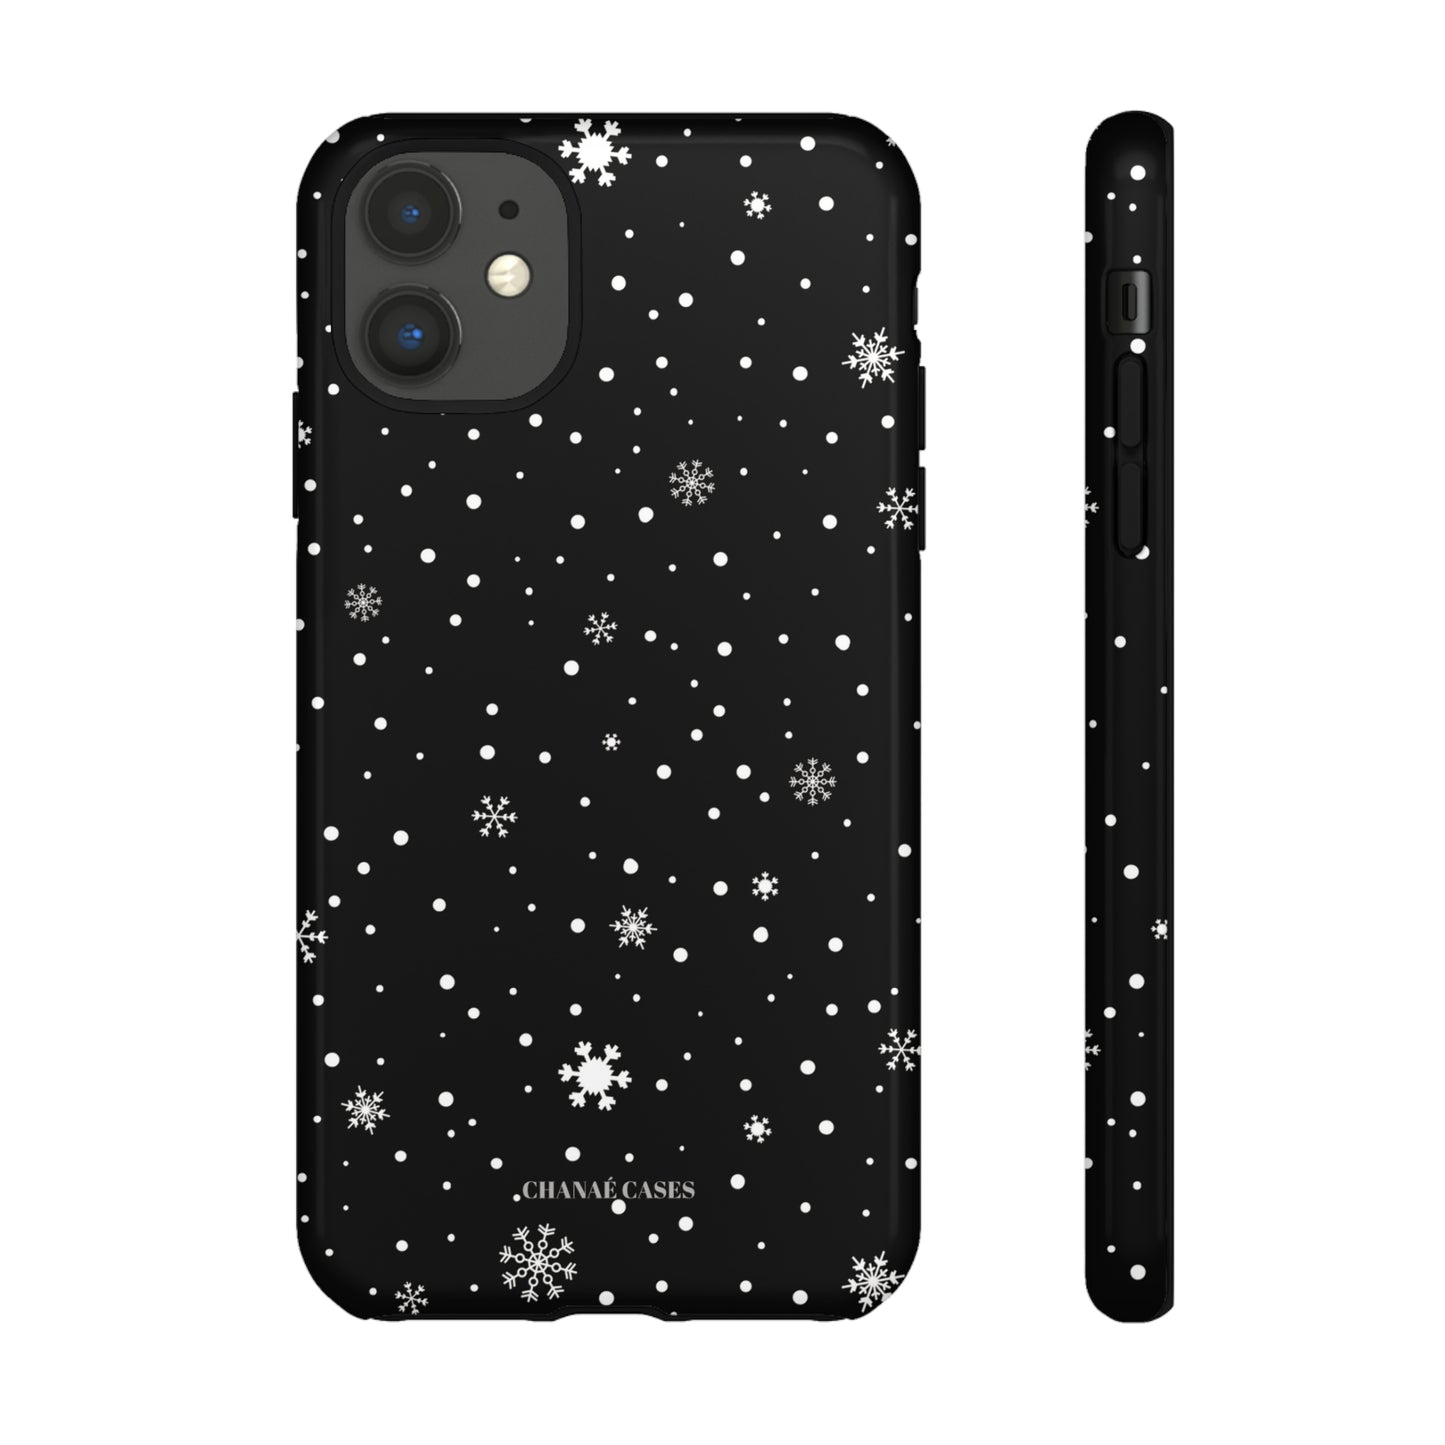 Frosty Frills iPhone "Tough" Case